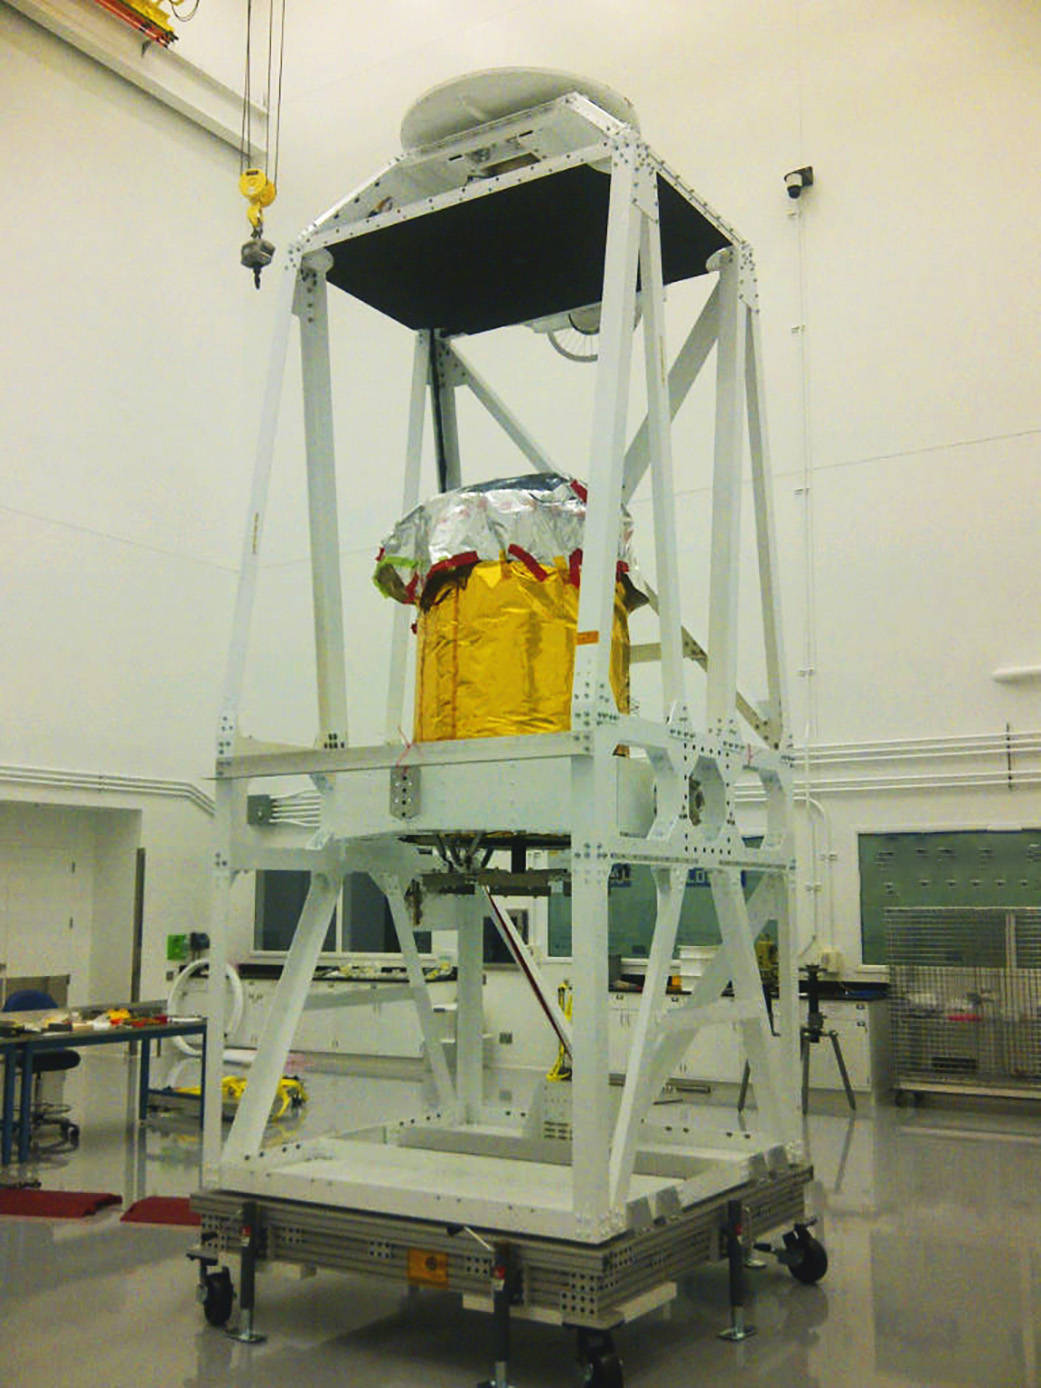 The BRRISON gondola holds scientific imaging equipment including a telescope and infrared and visible light cameras.